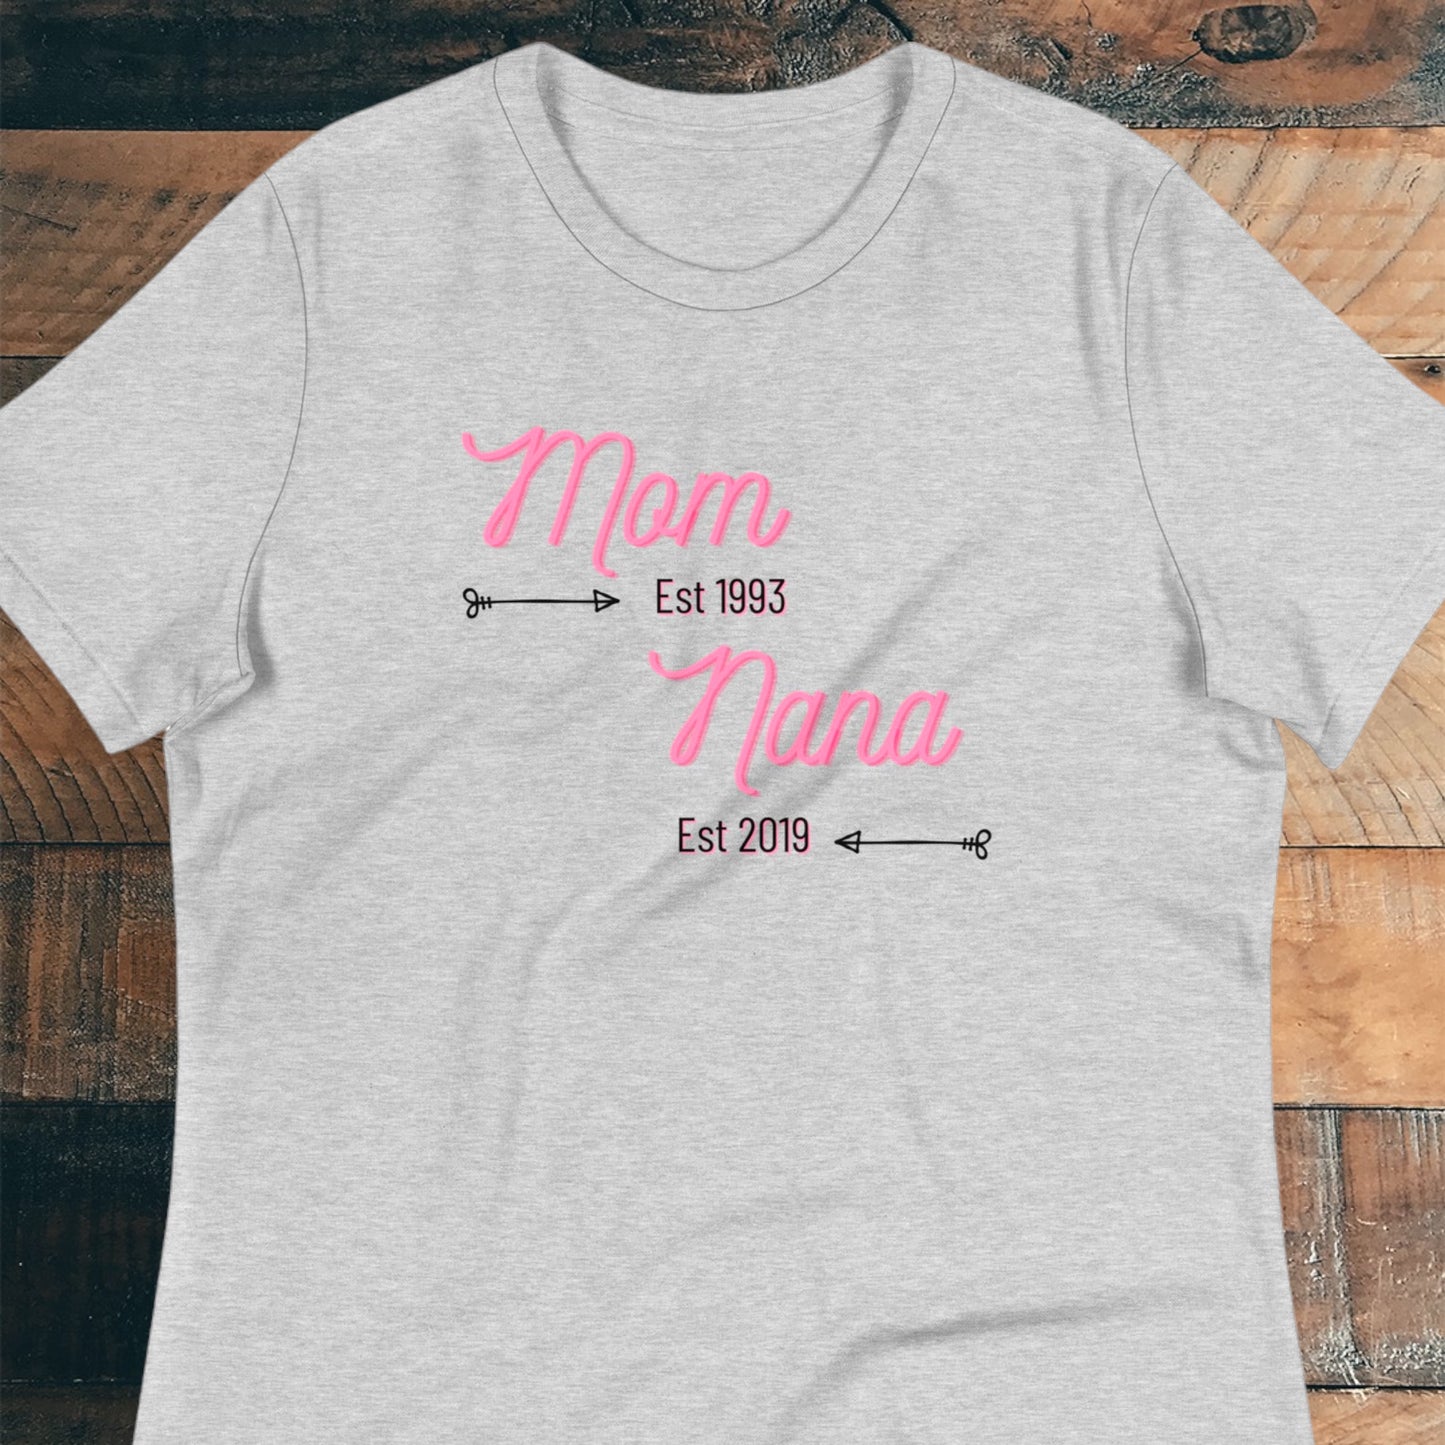 “Nana Est 2019 Mom Est 1993” T-Shirt - Weave Got Gifts - Unique Gifts You Won’t Find Anywhere Else!